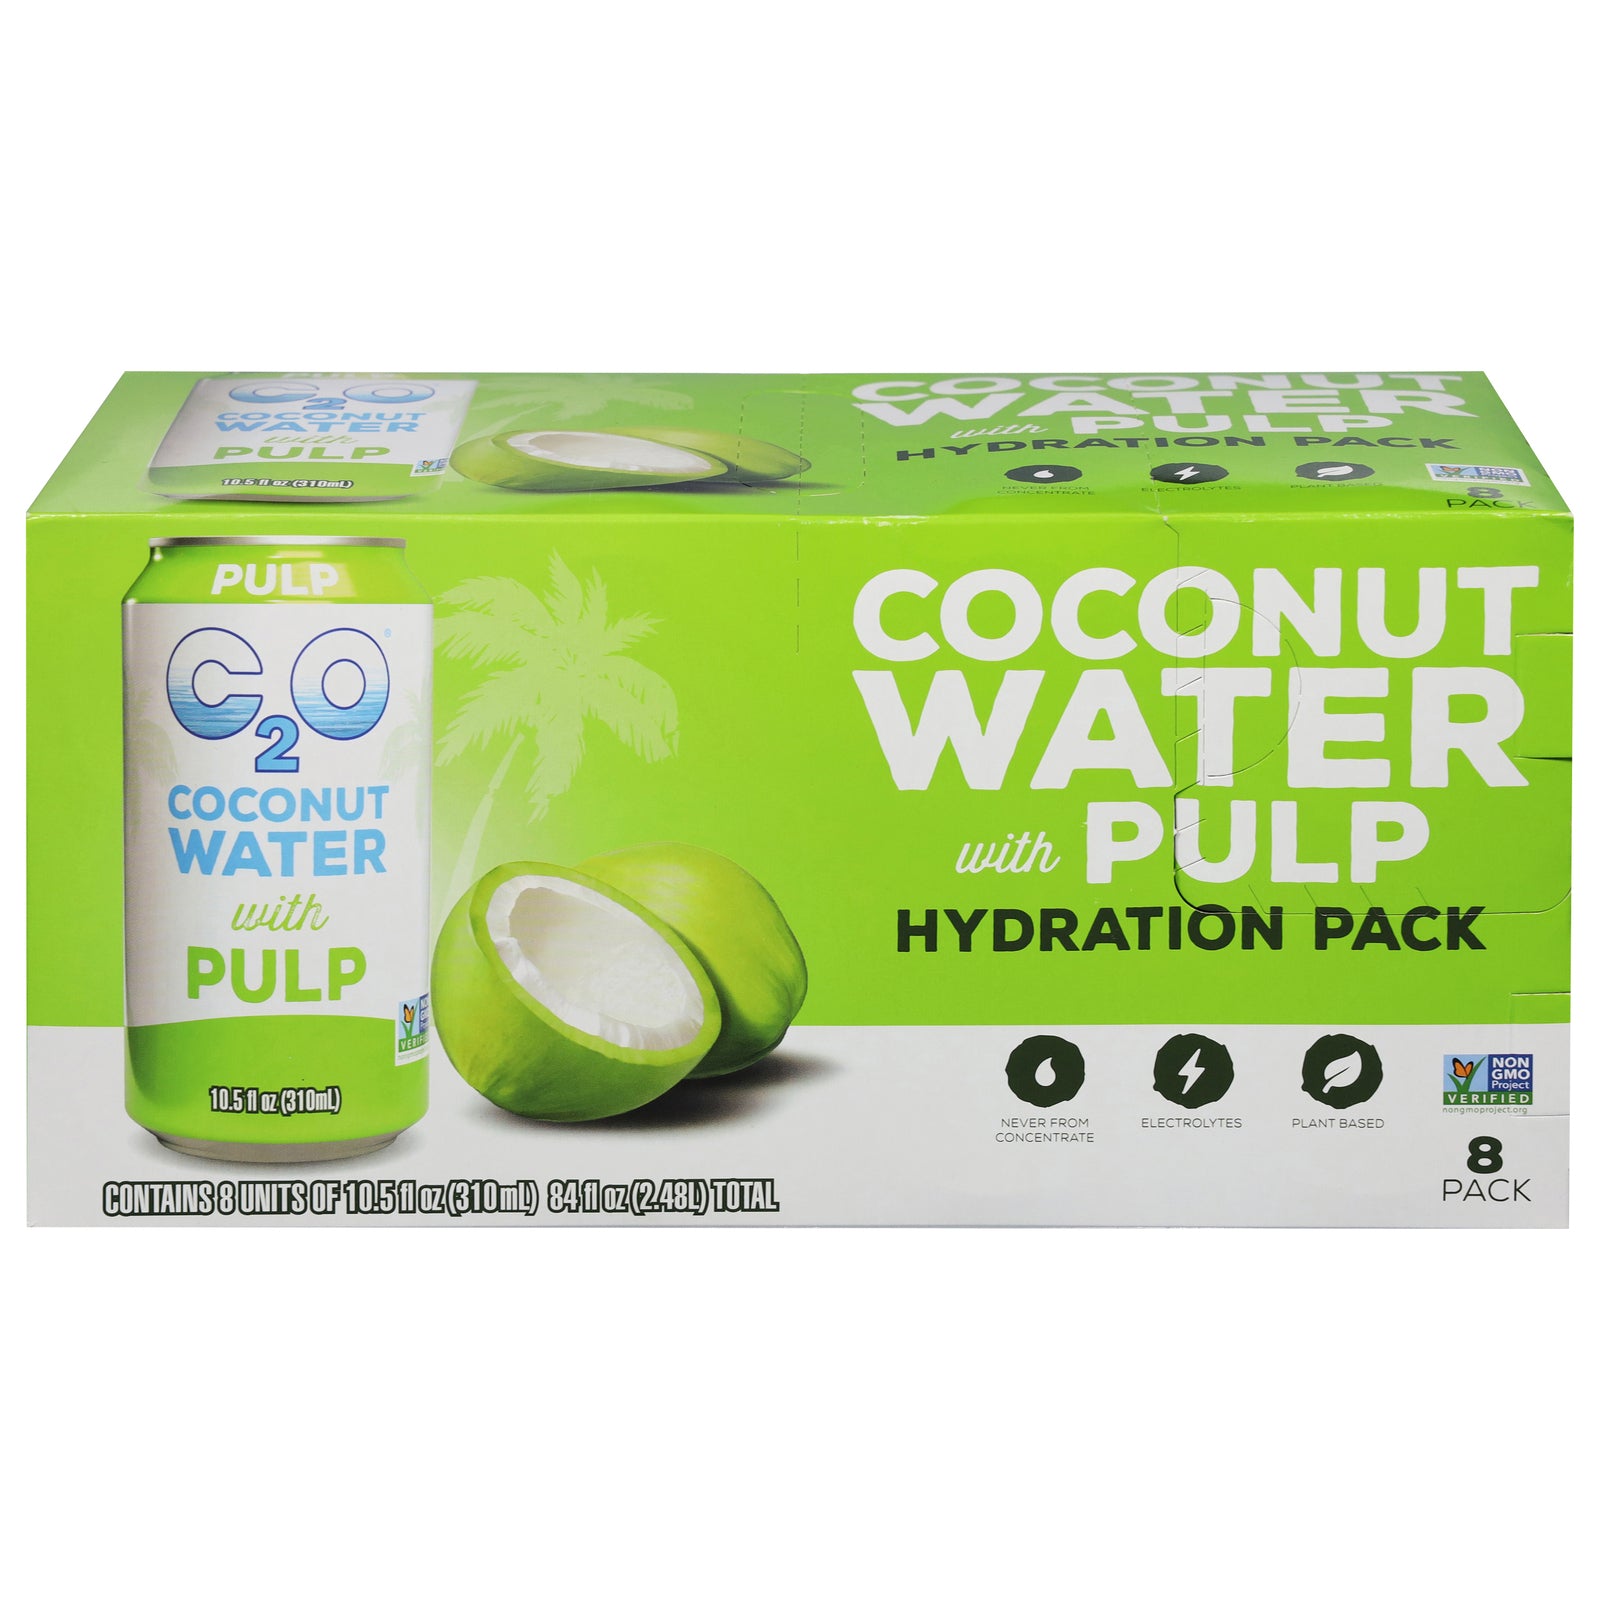 C2O Pure Coconut Water - Coconut Water With Pulp - Case of 3-8/10.5 Ounces